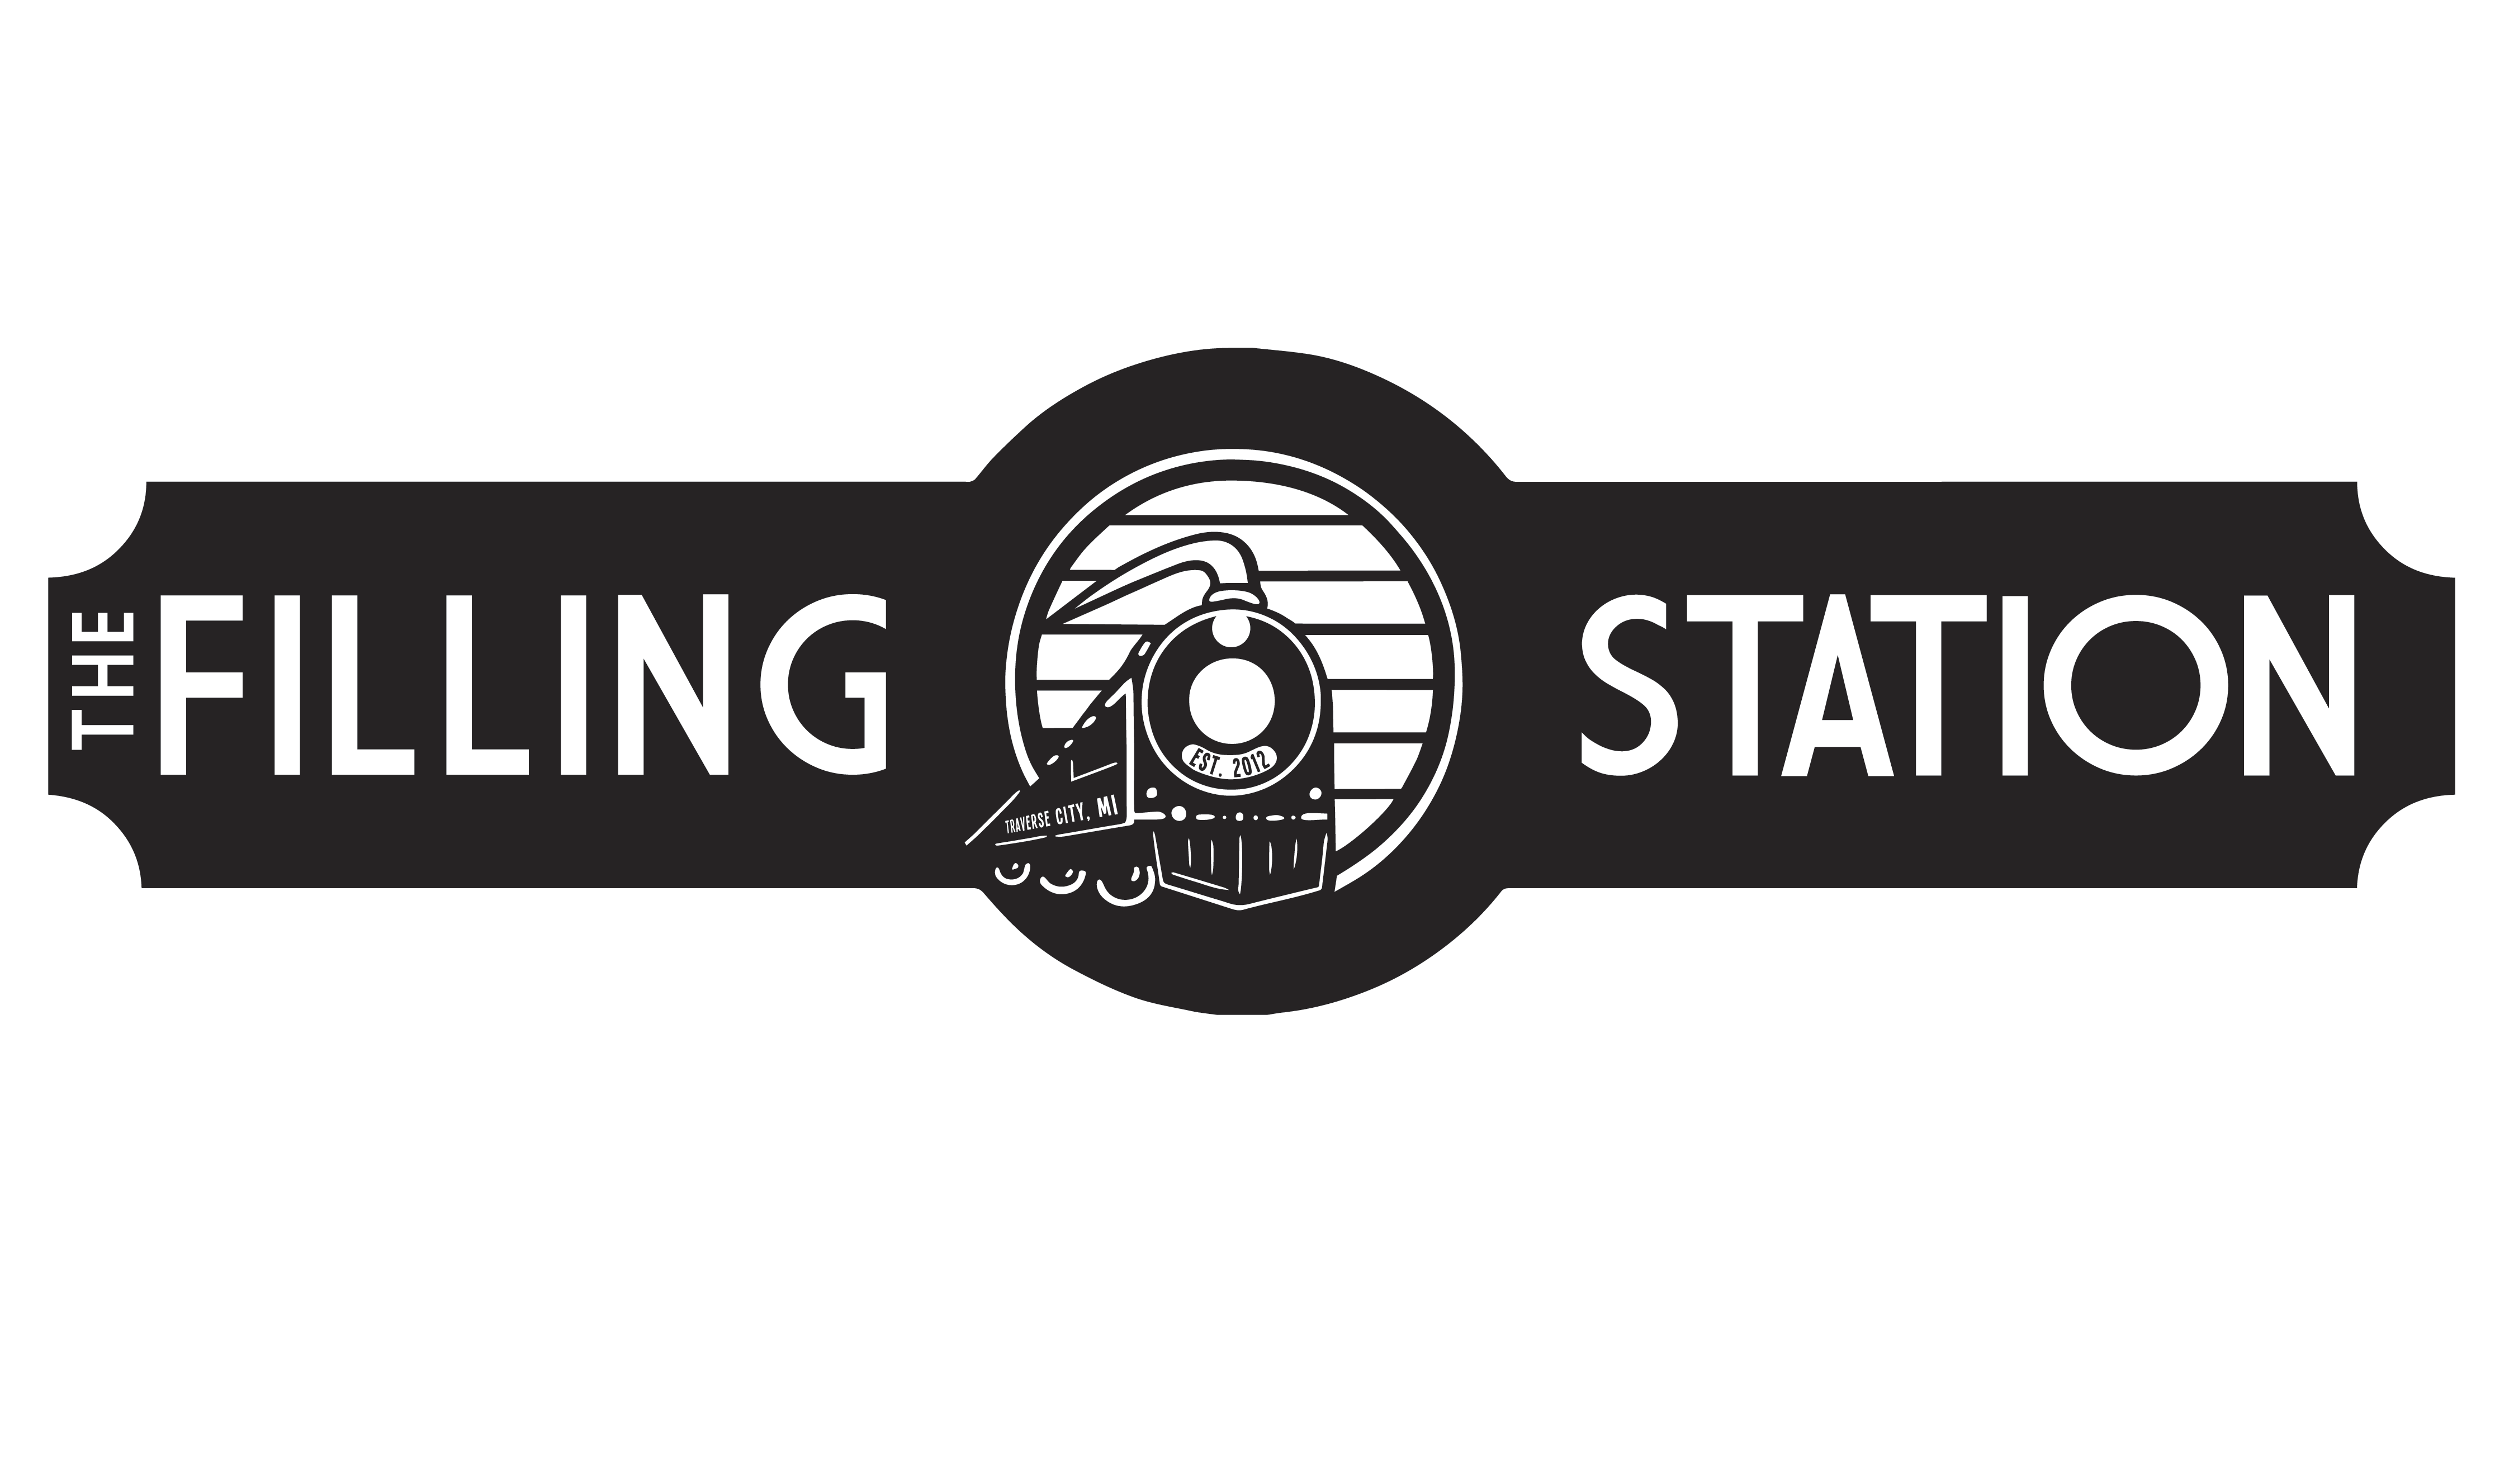 Microbrewery Logo - Home | The Filling Station Microbrewery